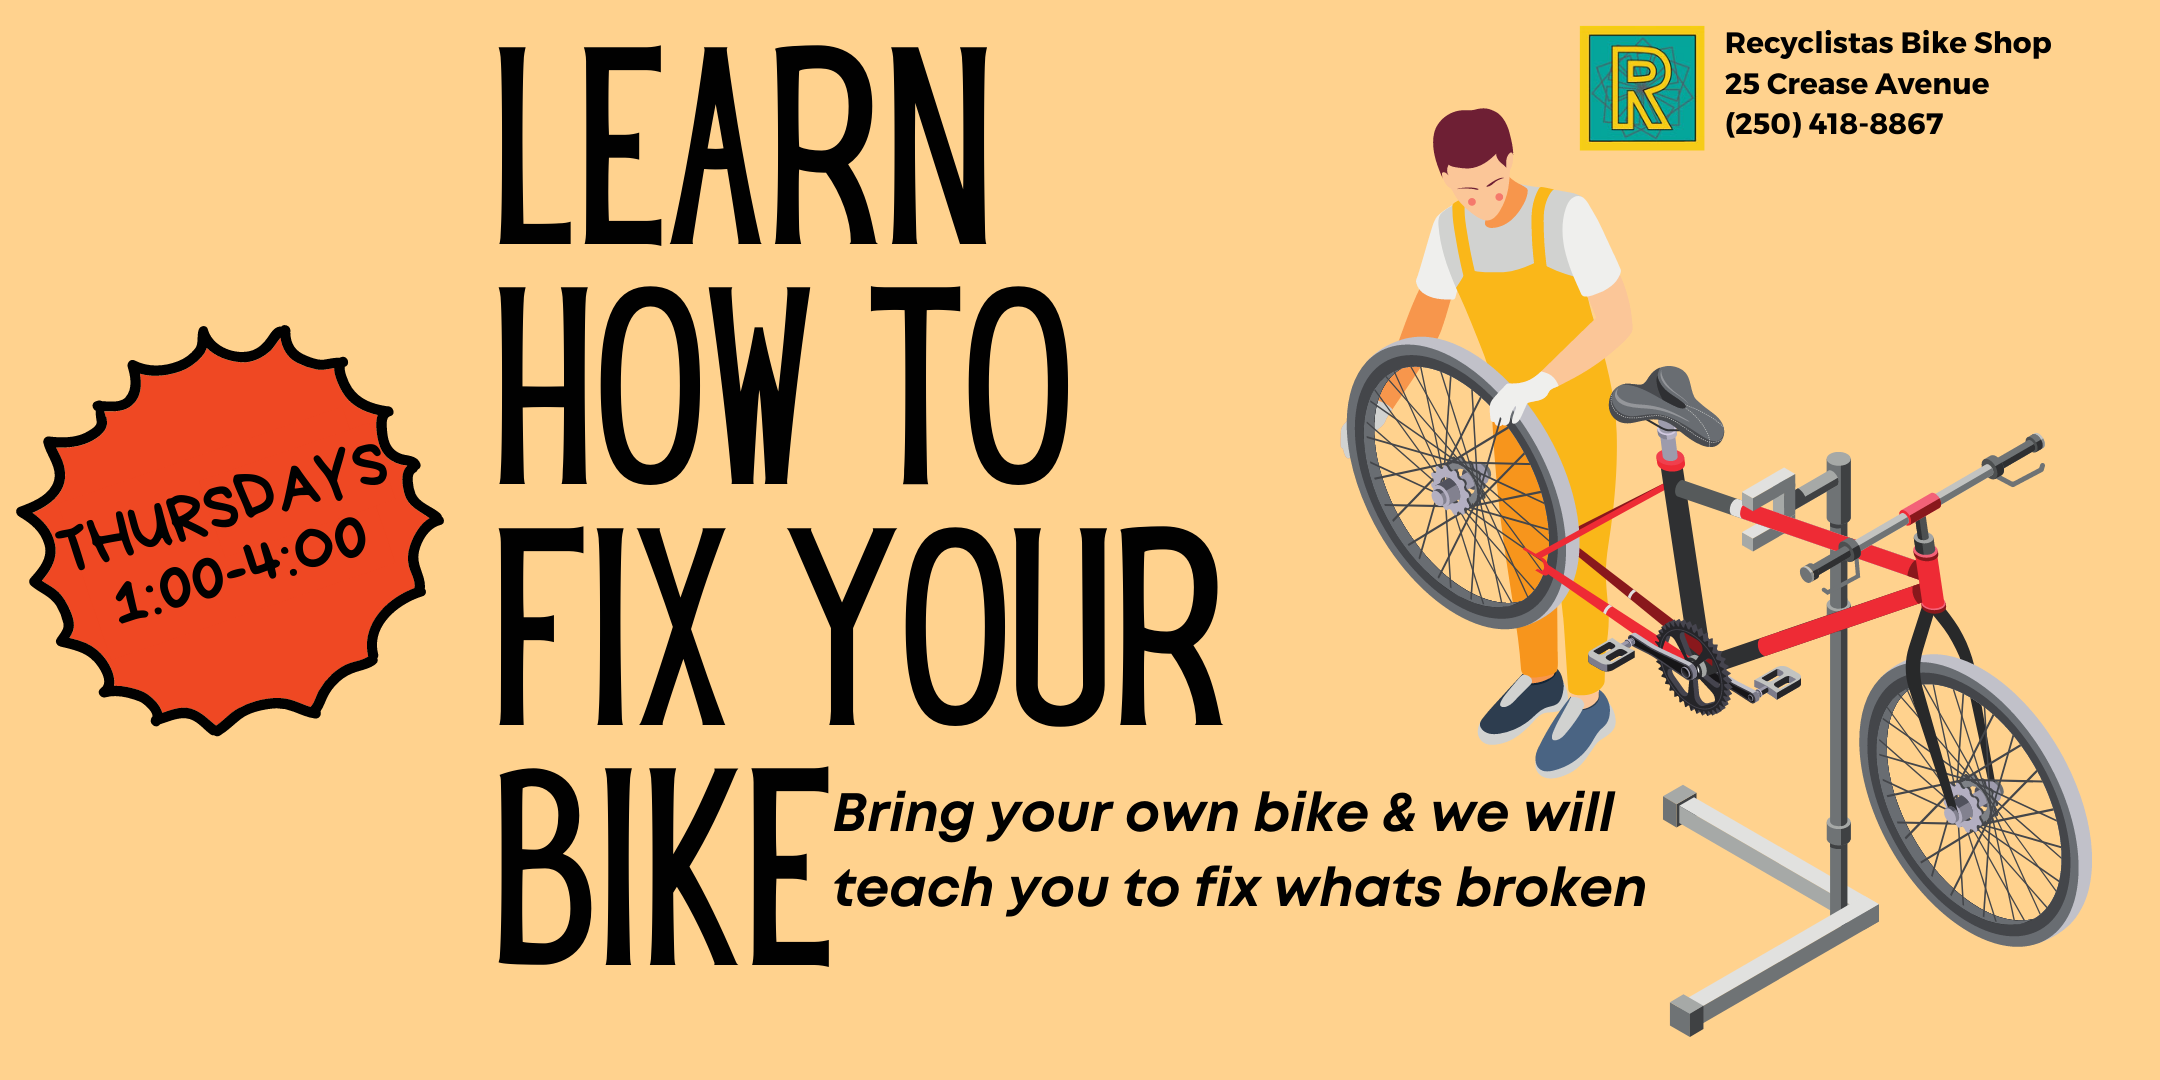 Learn to Fix Your Bike at Recyclistas on Thursdays from 1-4